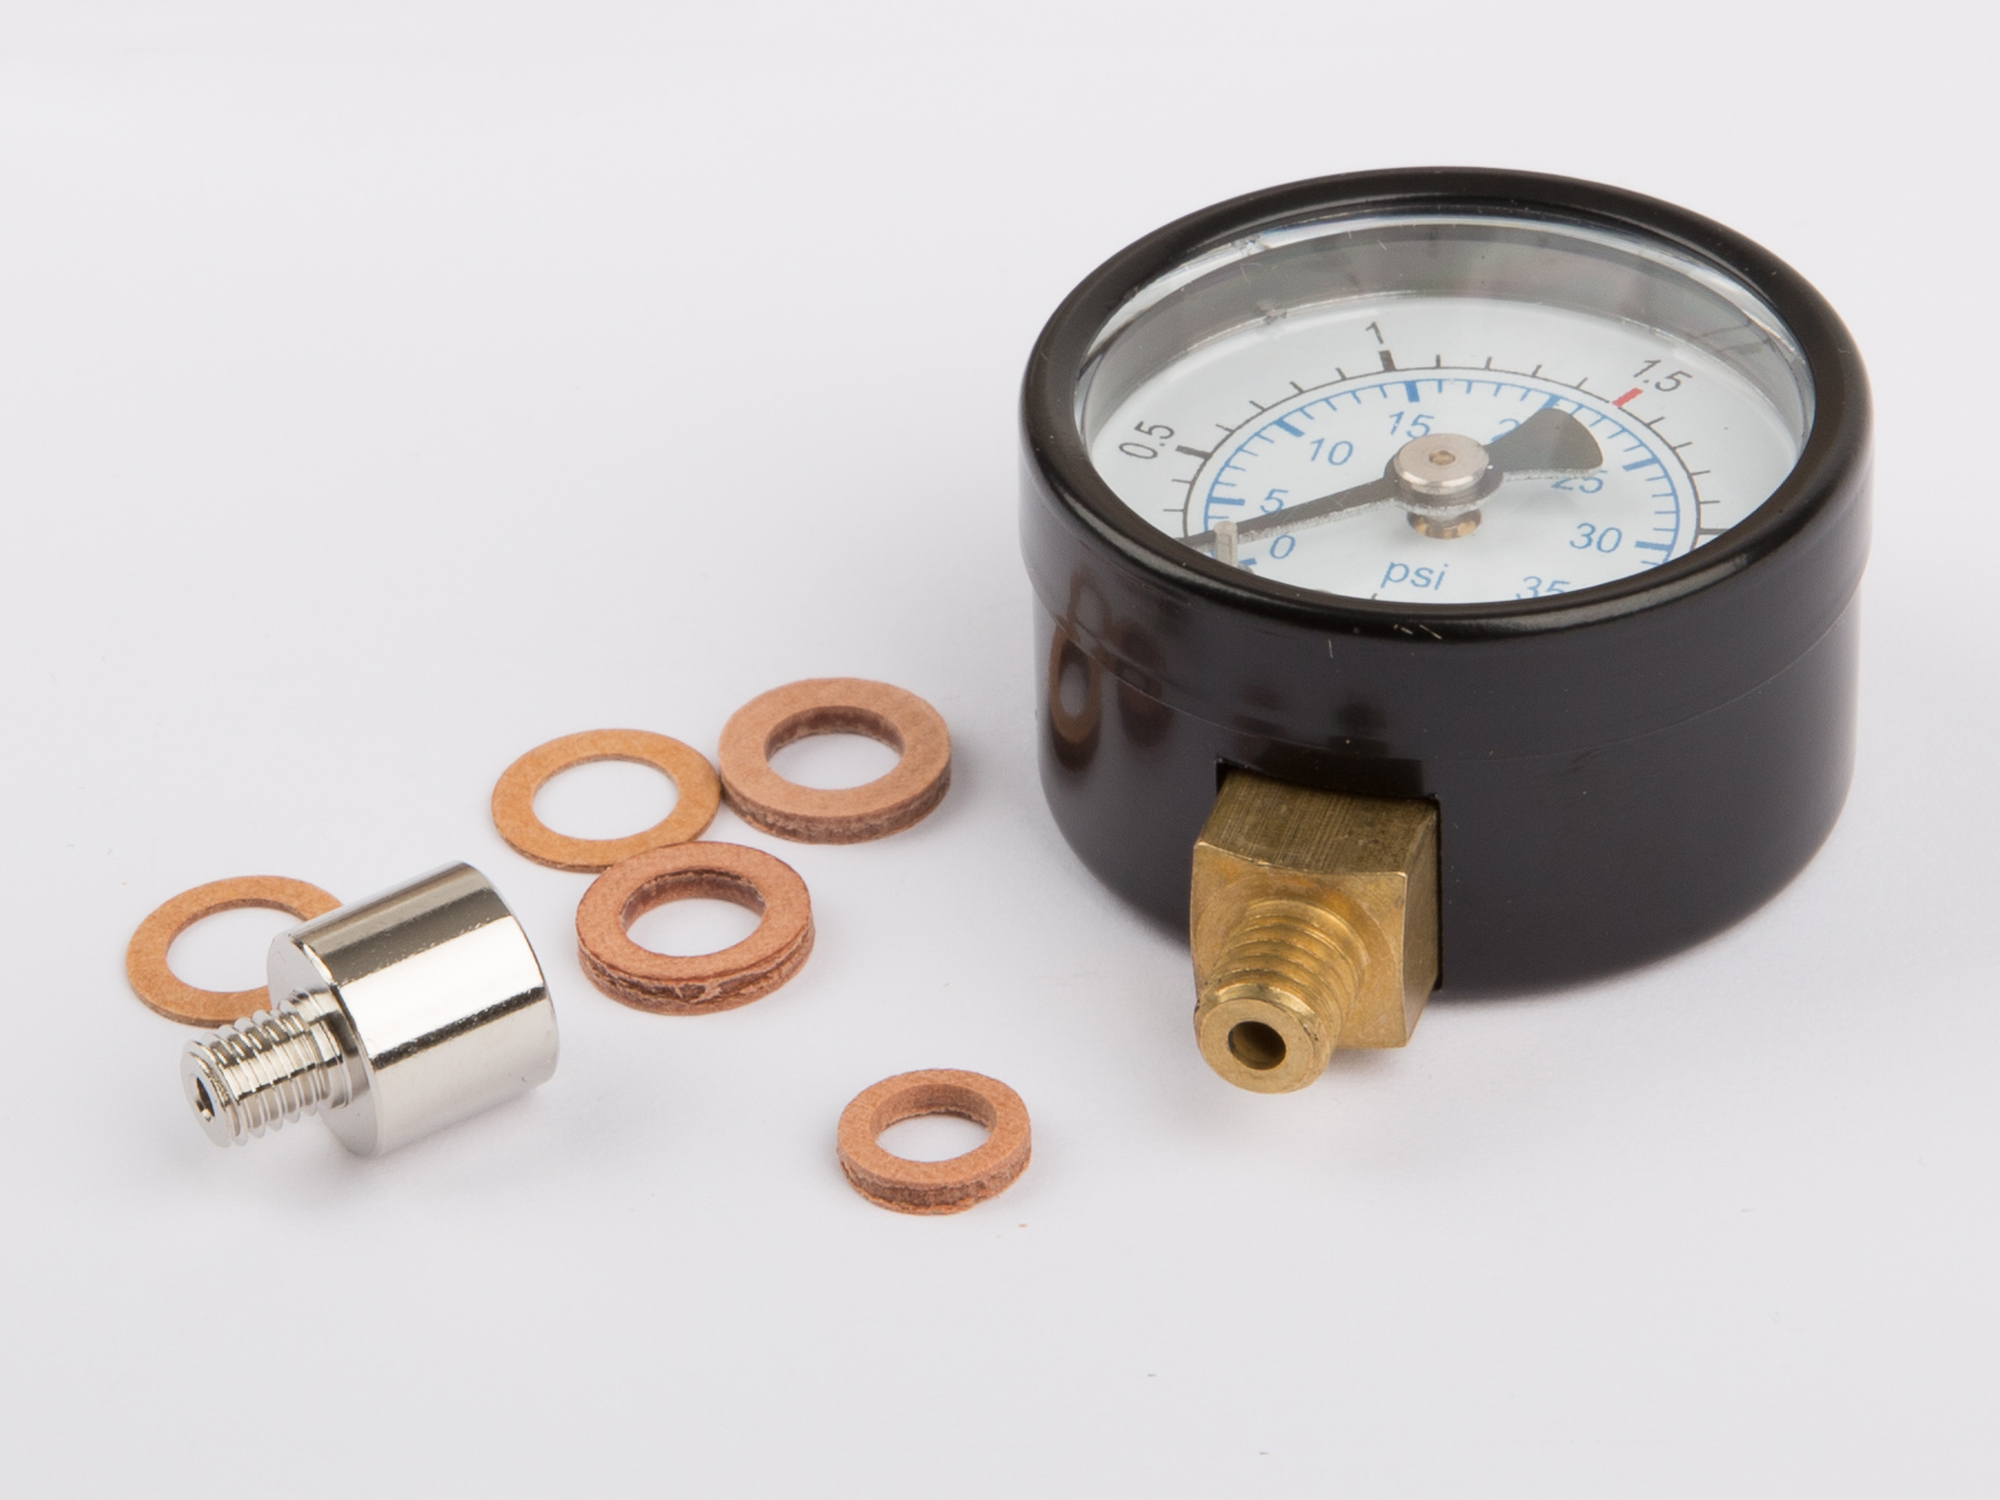 Manometer with connection on the botton, M6, 30 mm diameter, incl. adapter 01529, thread M6/M5 for D18, D20, D22, D141, D430, T125